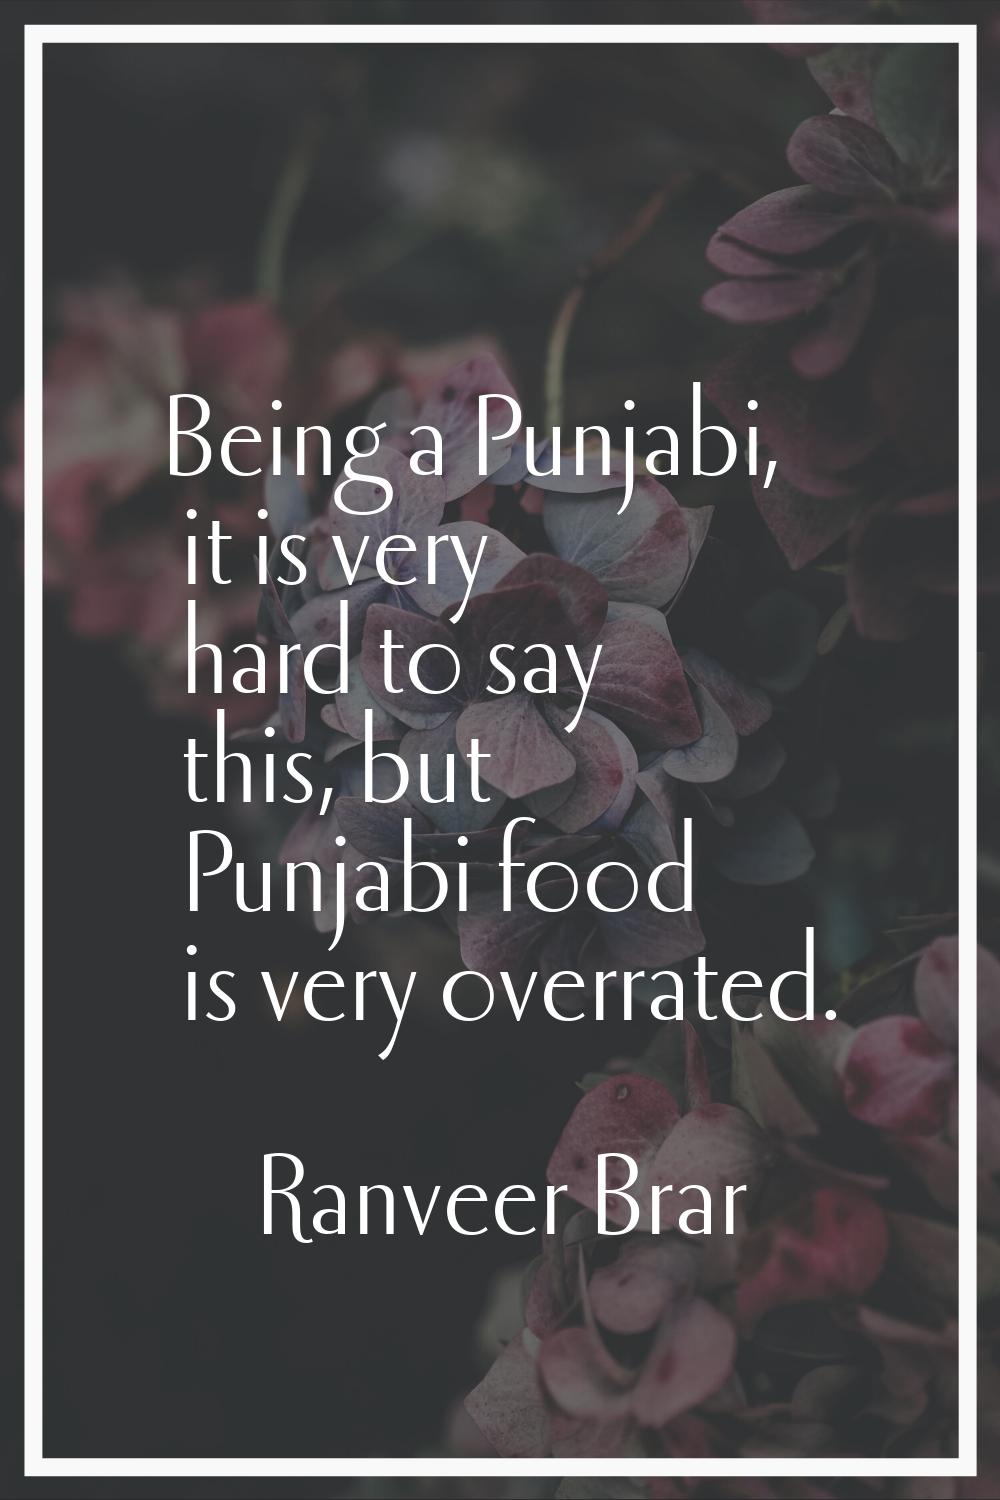 Being a Punjabi, it is very hard to say this, but Punjabi food is very overrated.